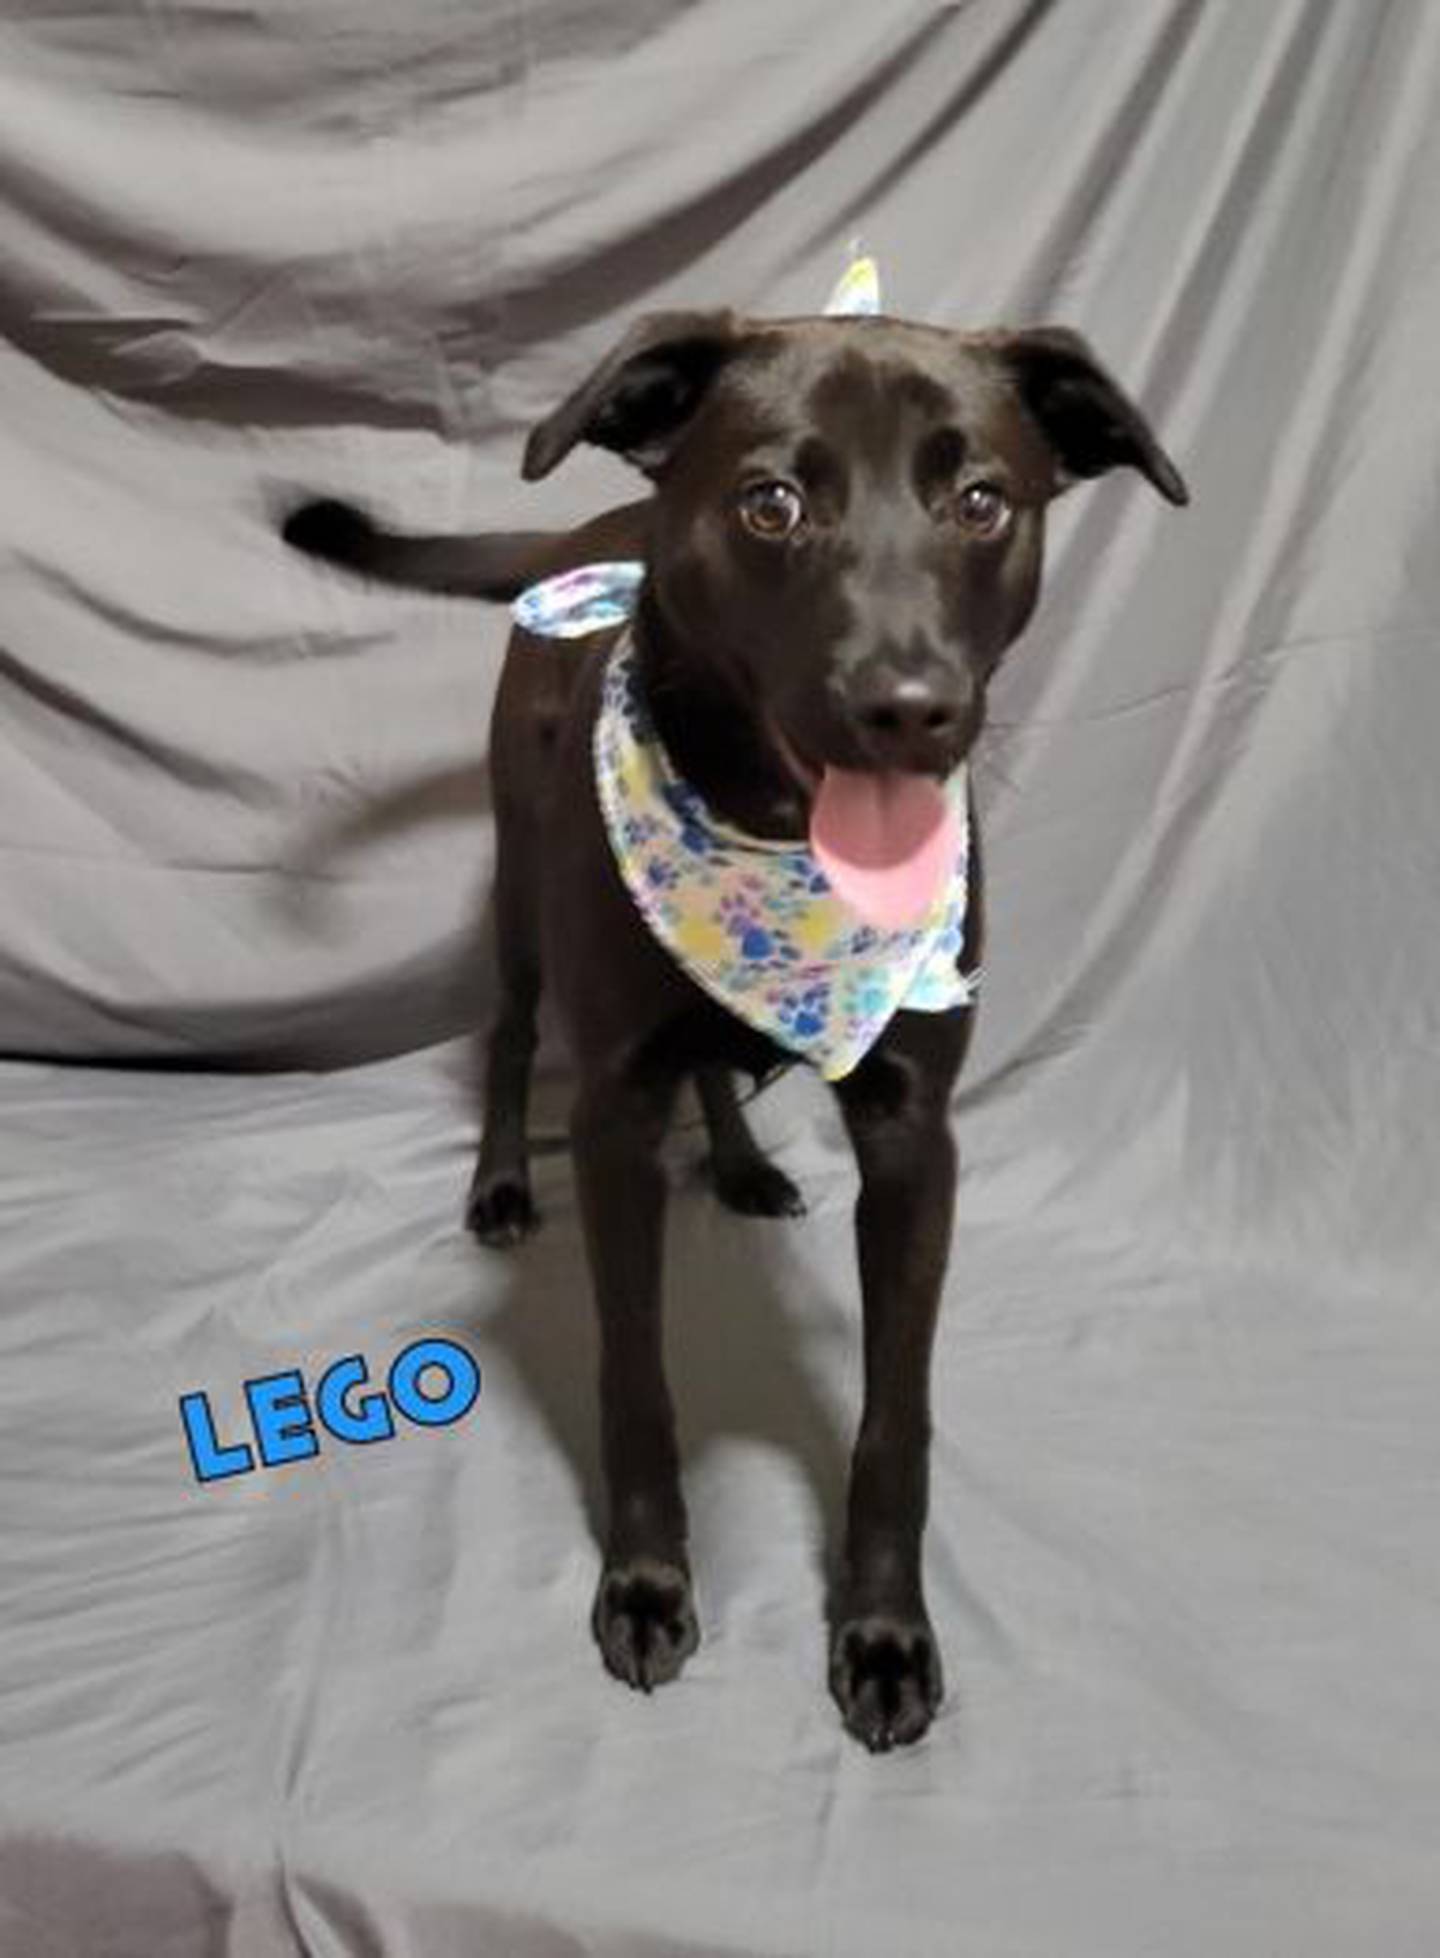 Lego, who is possibly a Lab and shepherd mix, is 7 months old and weighs only 31 pounds. To meet contact Hopeful Tails Animal Rescue at hopefultailsadoptions@outlook.com. Visit hopefultailsanimalrescue.org.